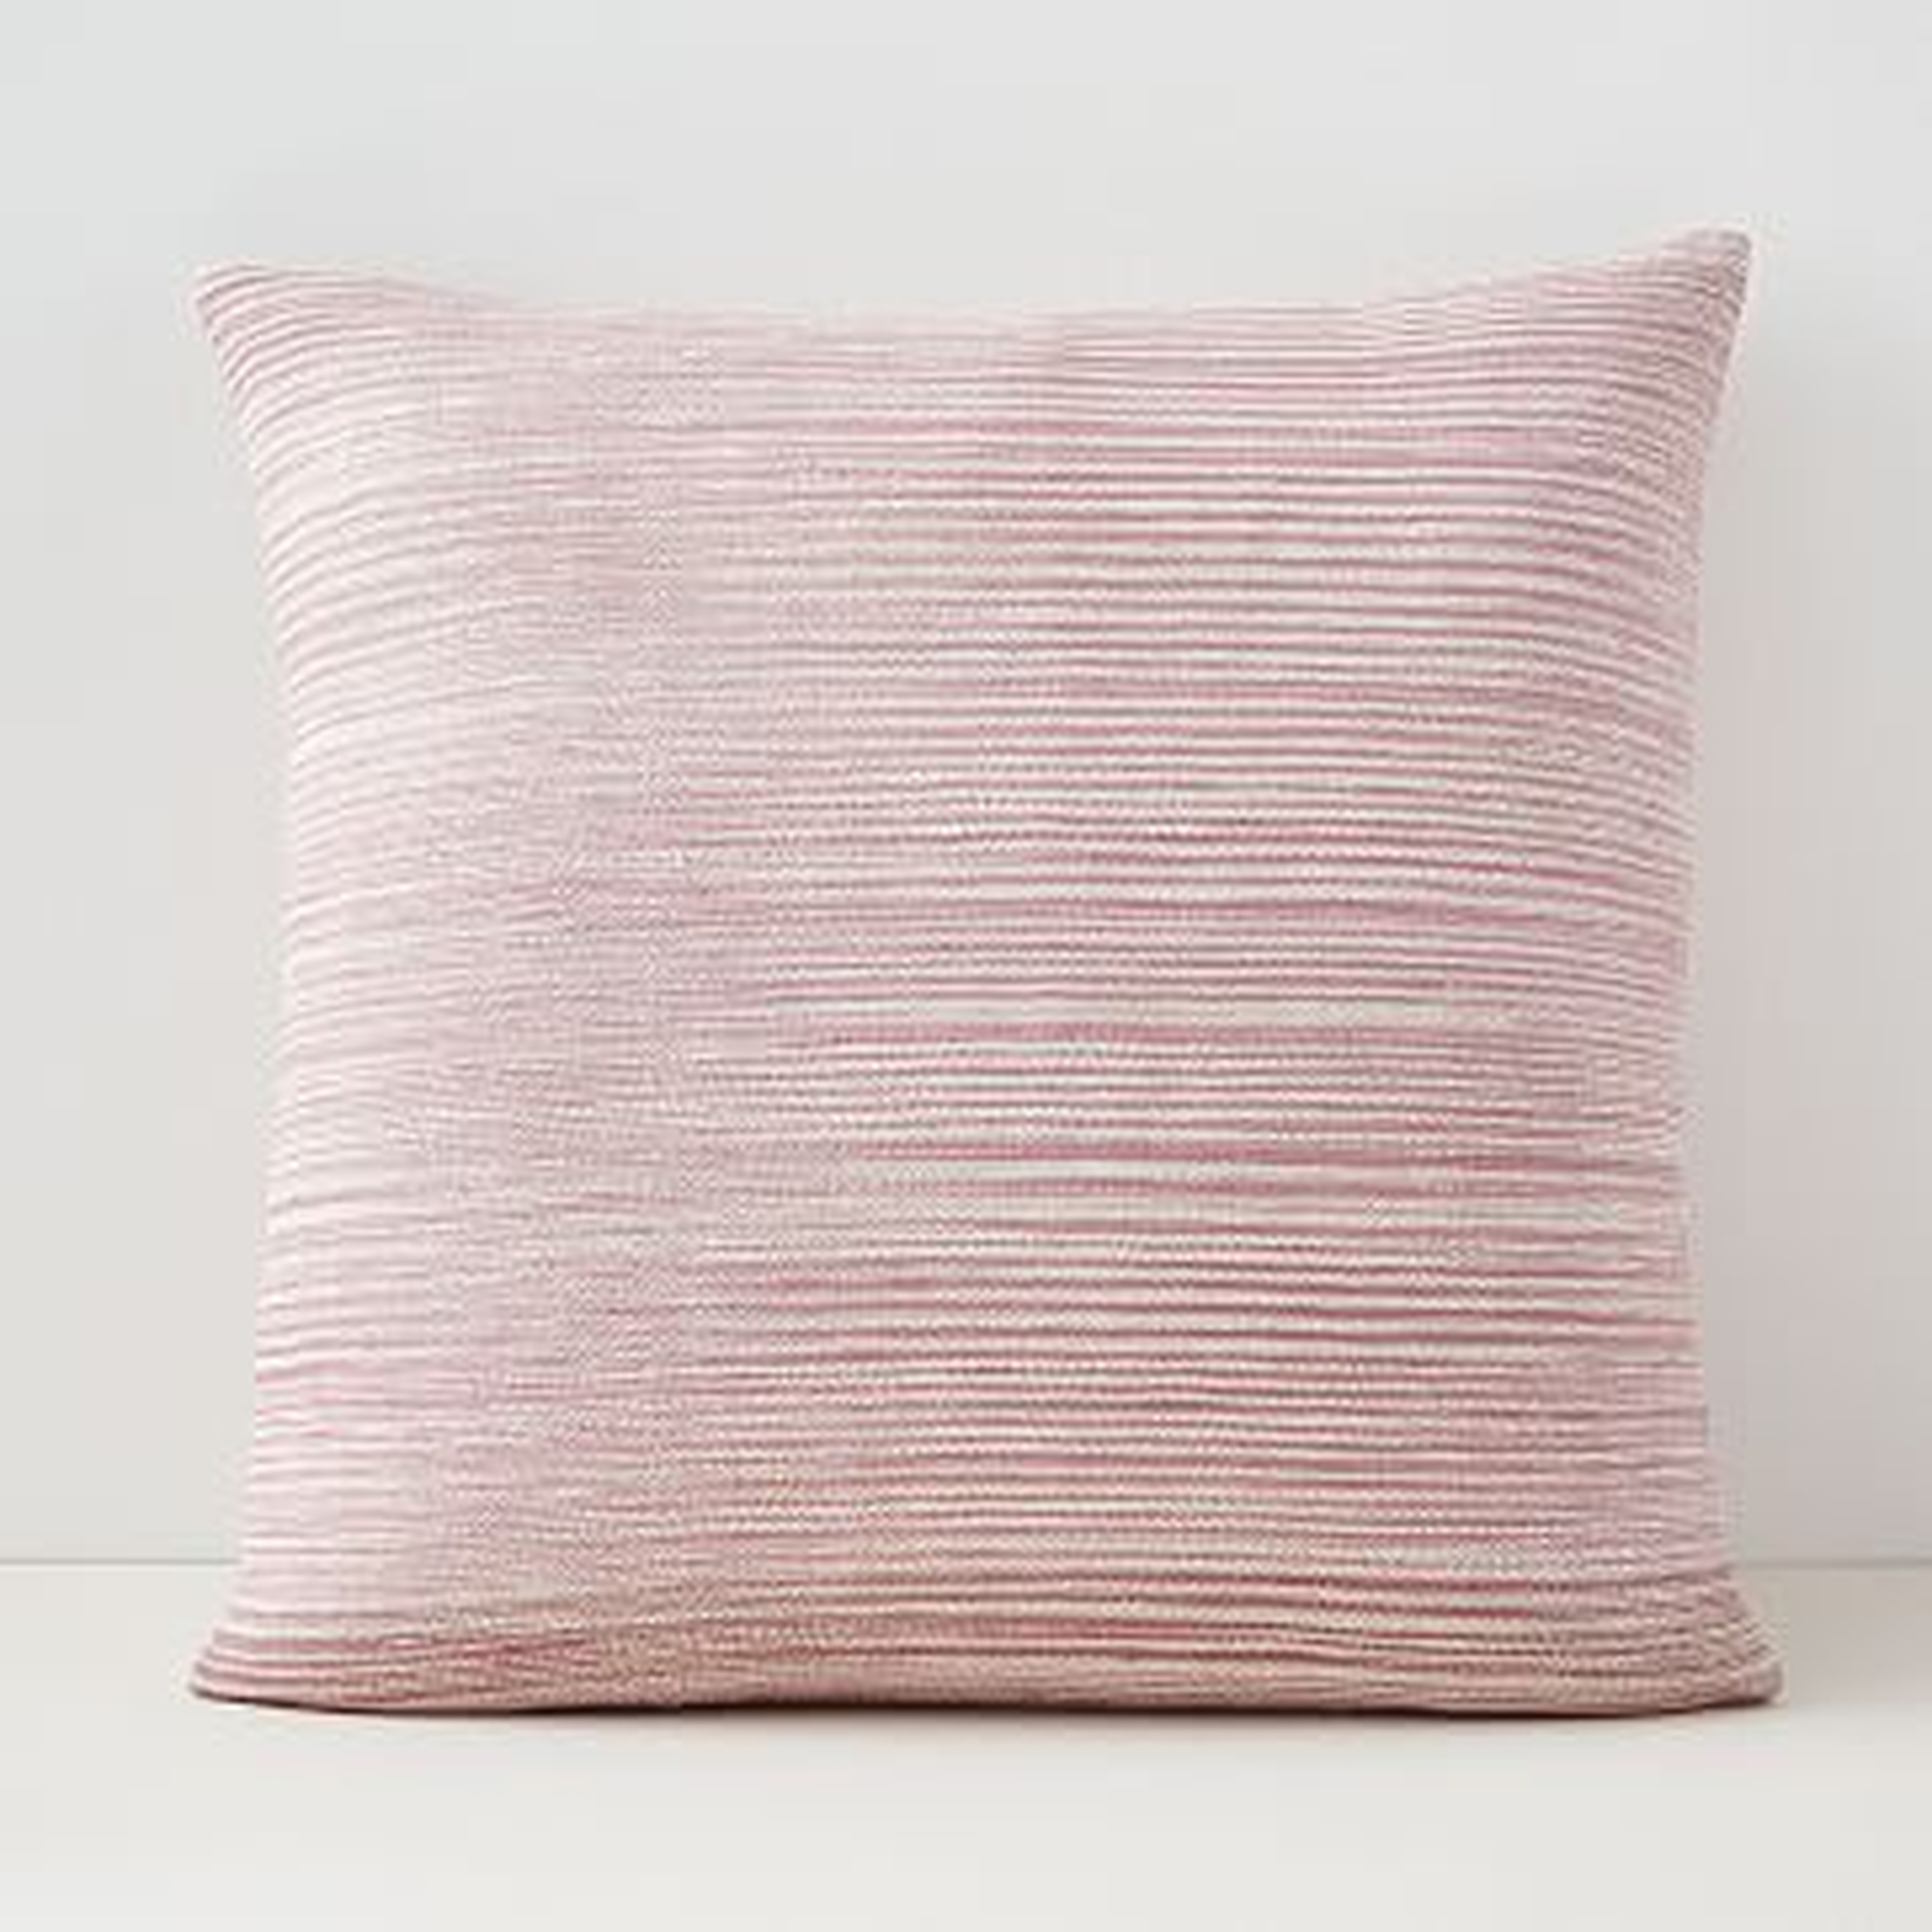 Silk Ombre Striations Pillow Cover, 24"x24", Pink Stone - West Elm